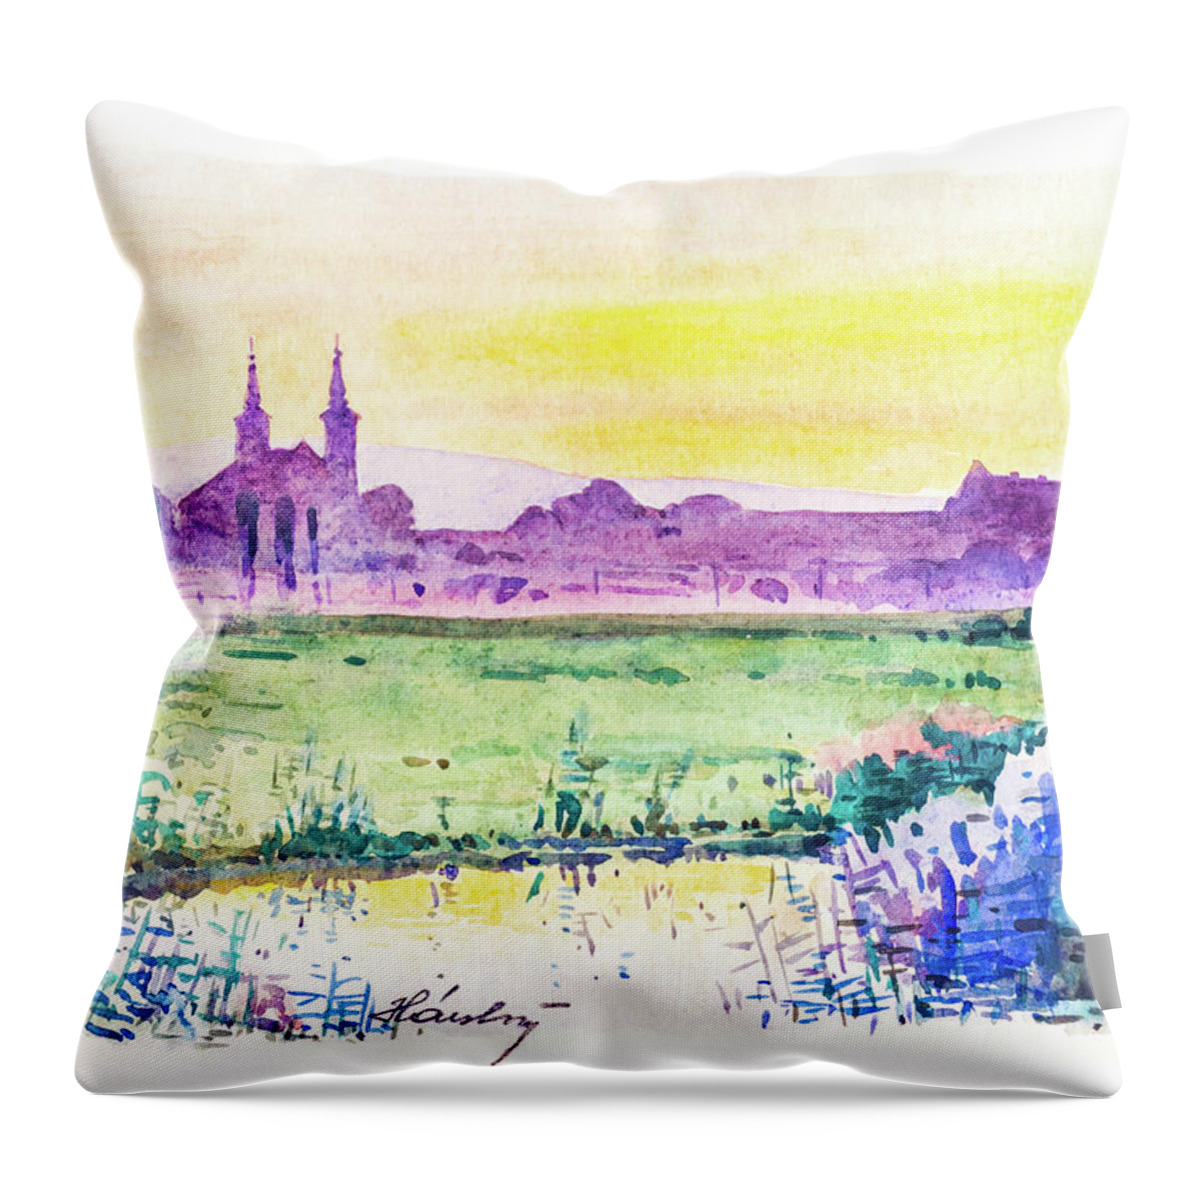 1930s Throw Pillow featuring the painting Landscape with city silhouette at sunset, Dalmatia, 1938 by Viktor Wallon-Hars